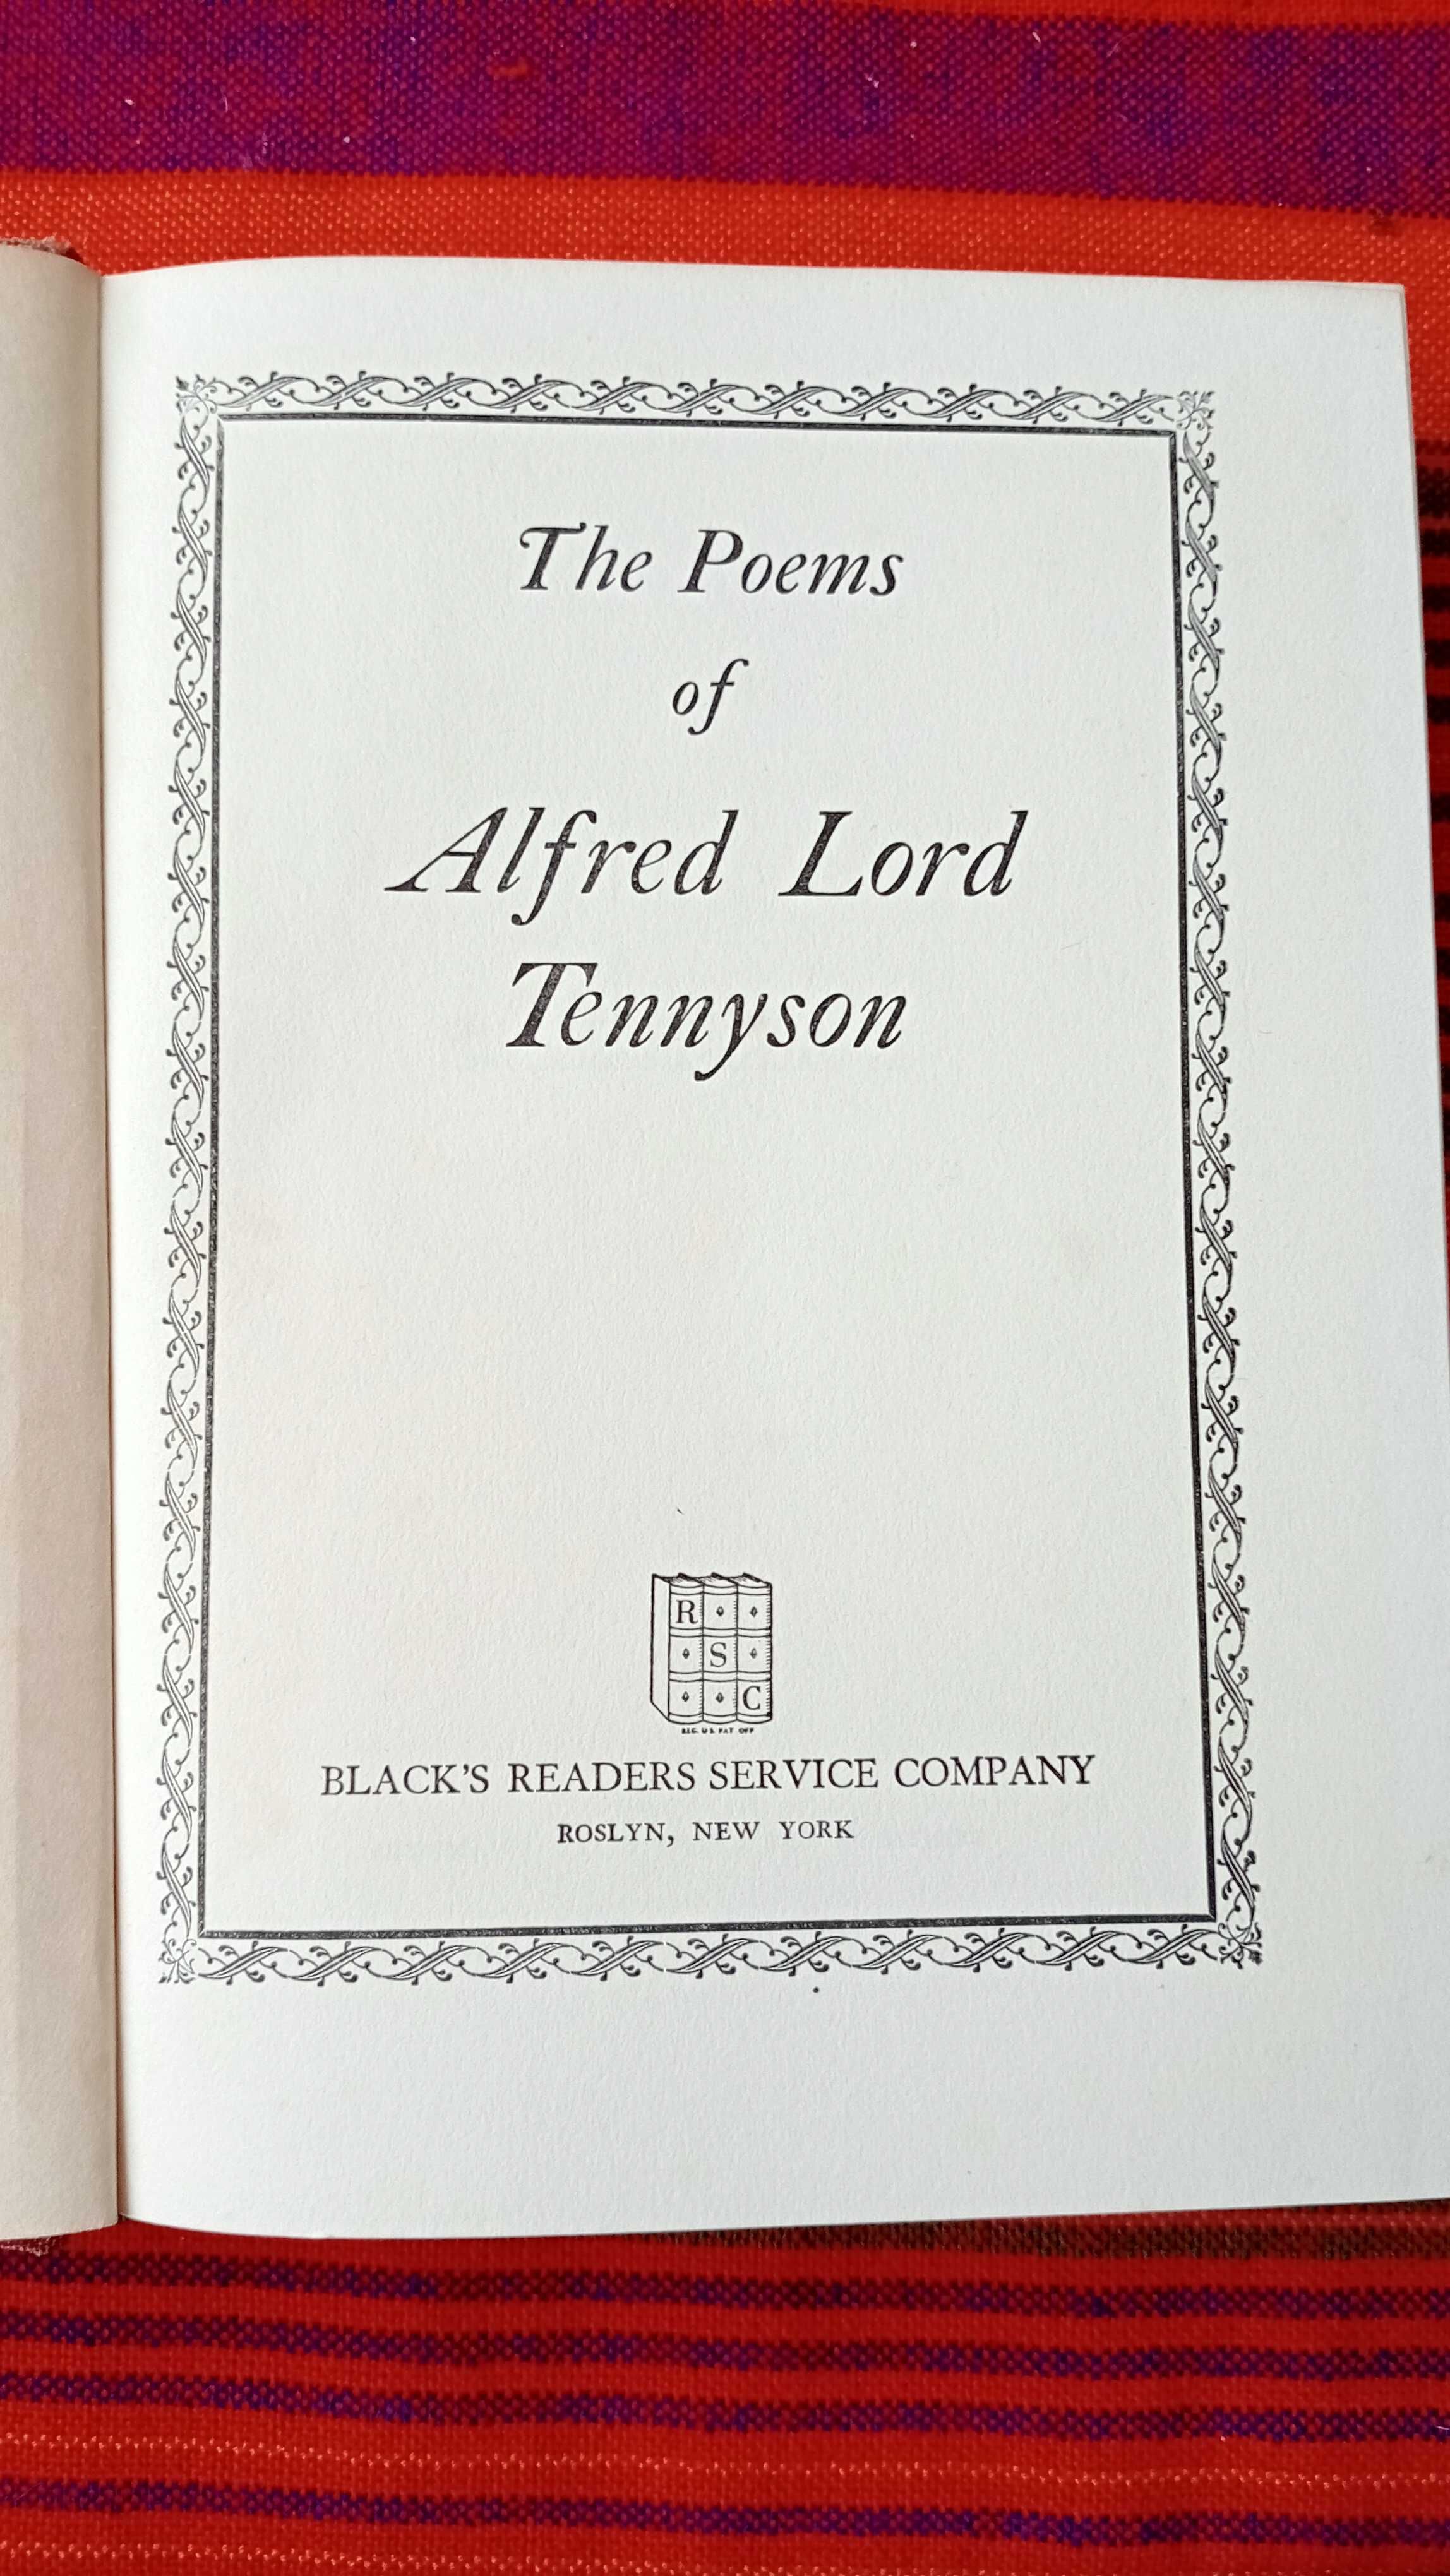 The poems of Alfred Lord Tennyson